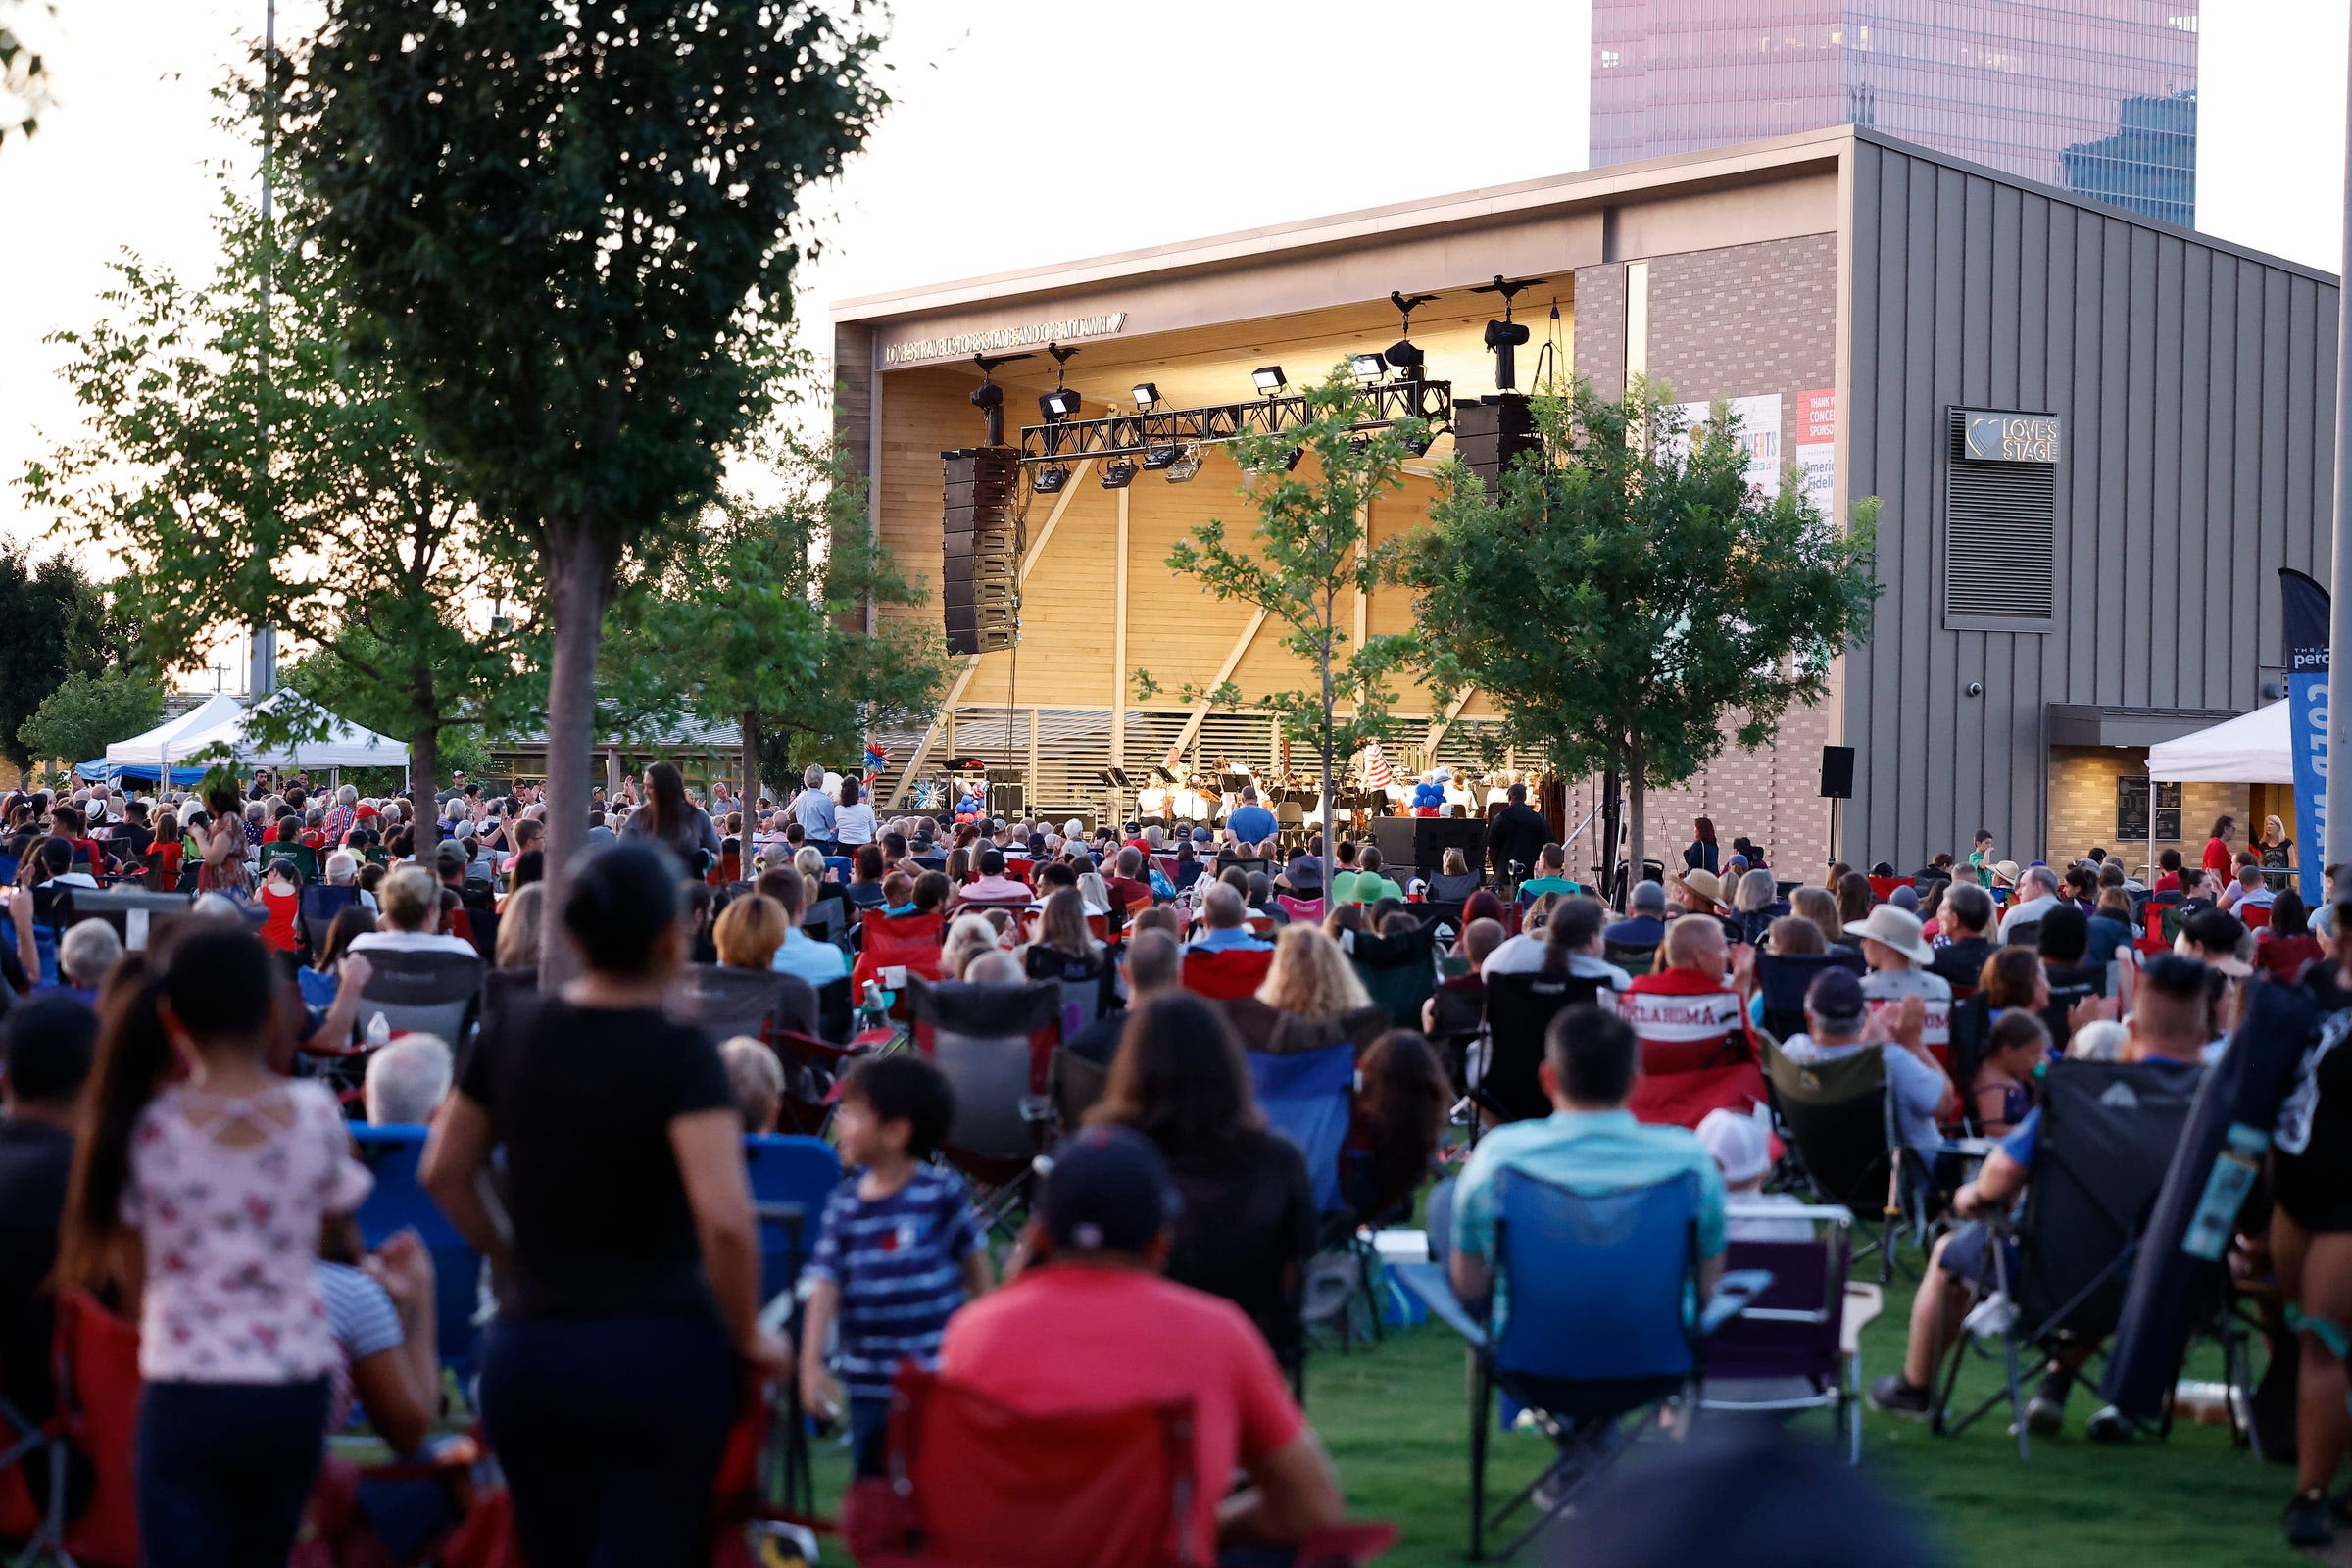 15+ fun (and free!) family things to do across Oklahoma City metro this summer